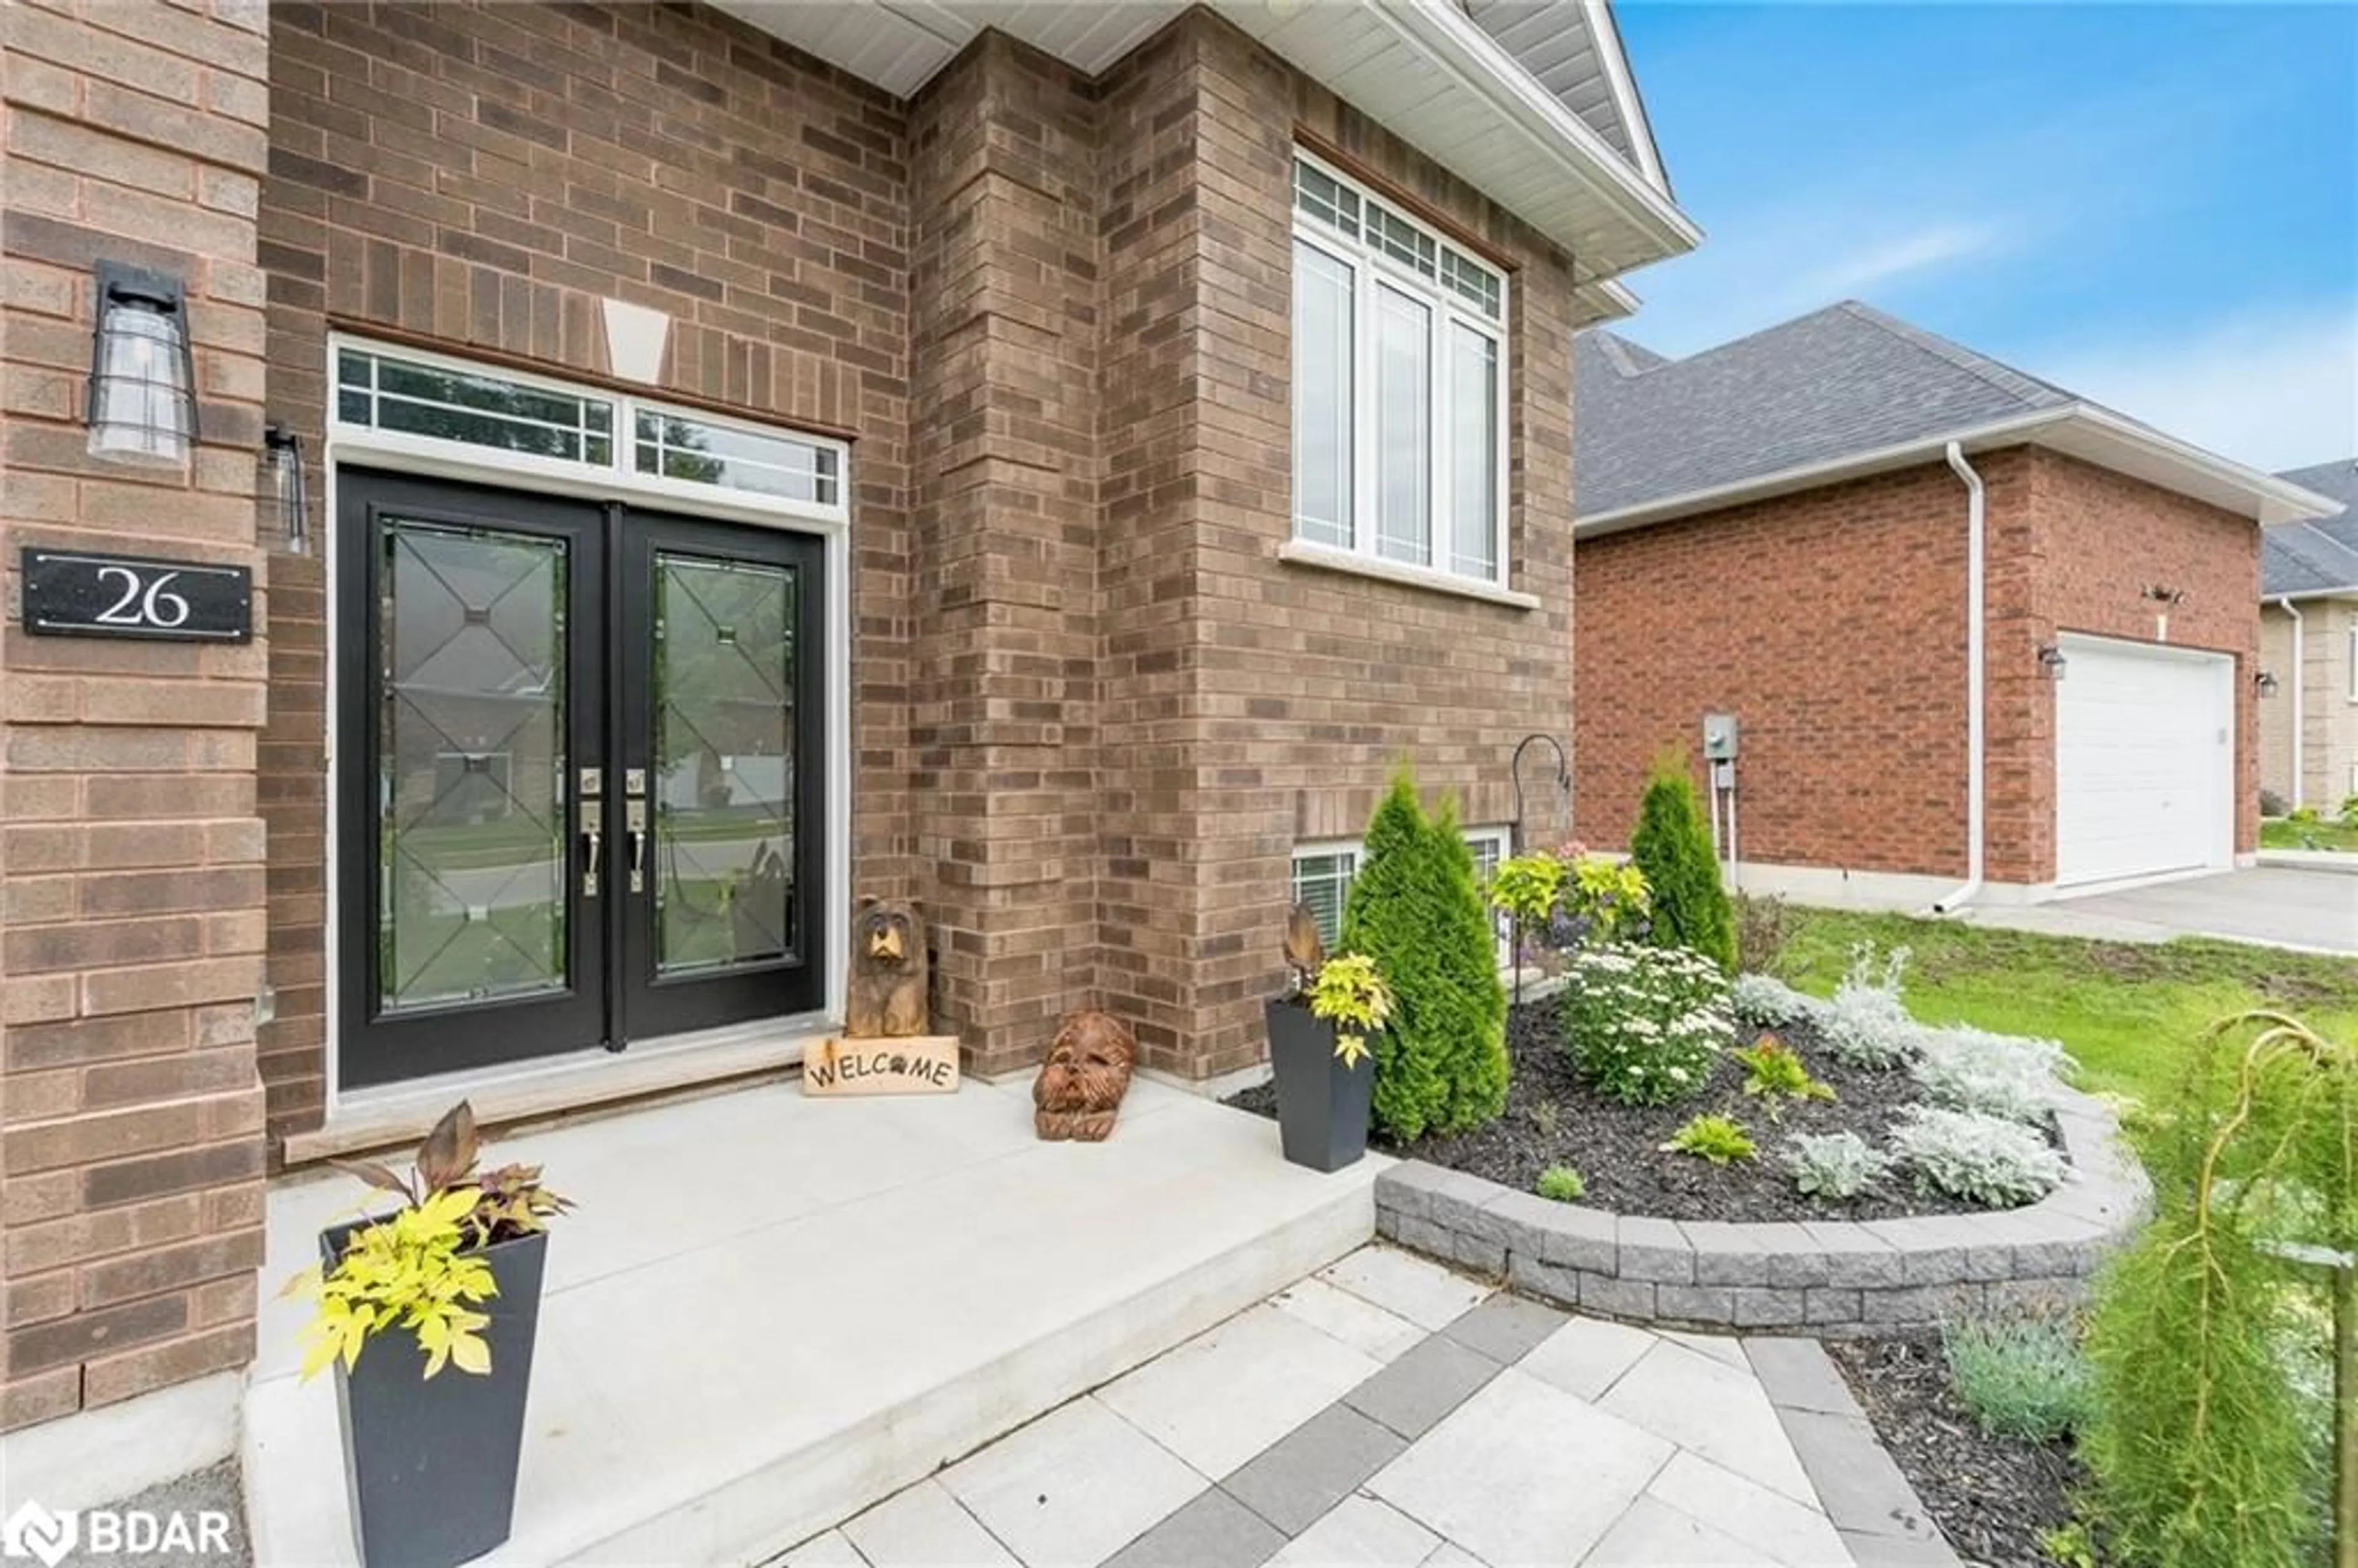 Home with brick exterior material for 26 Natures Trail, Wasaga Beach Ontario L9Z 0H4